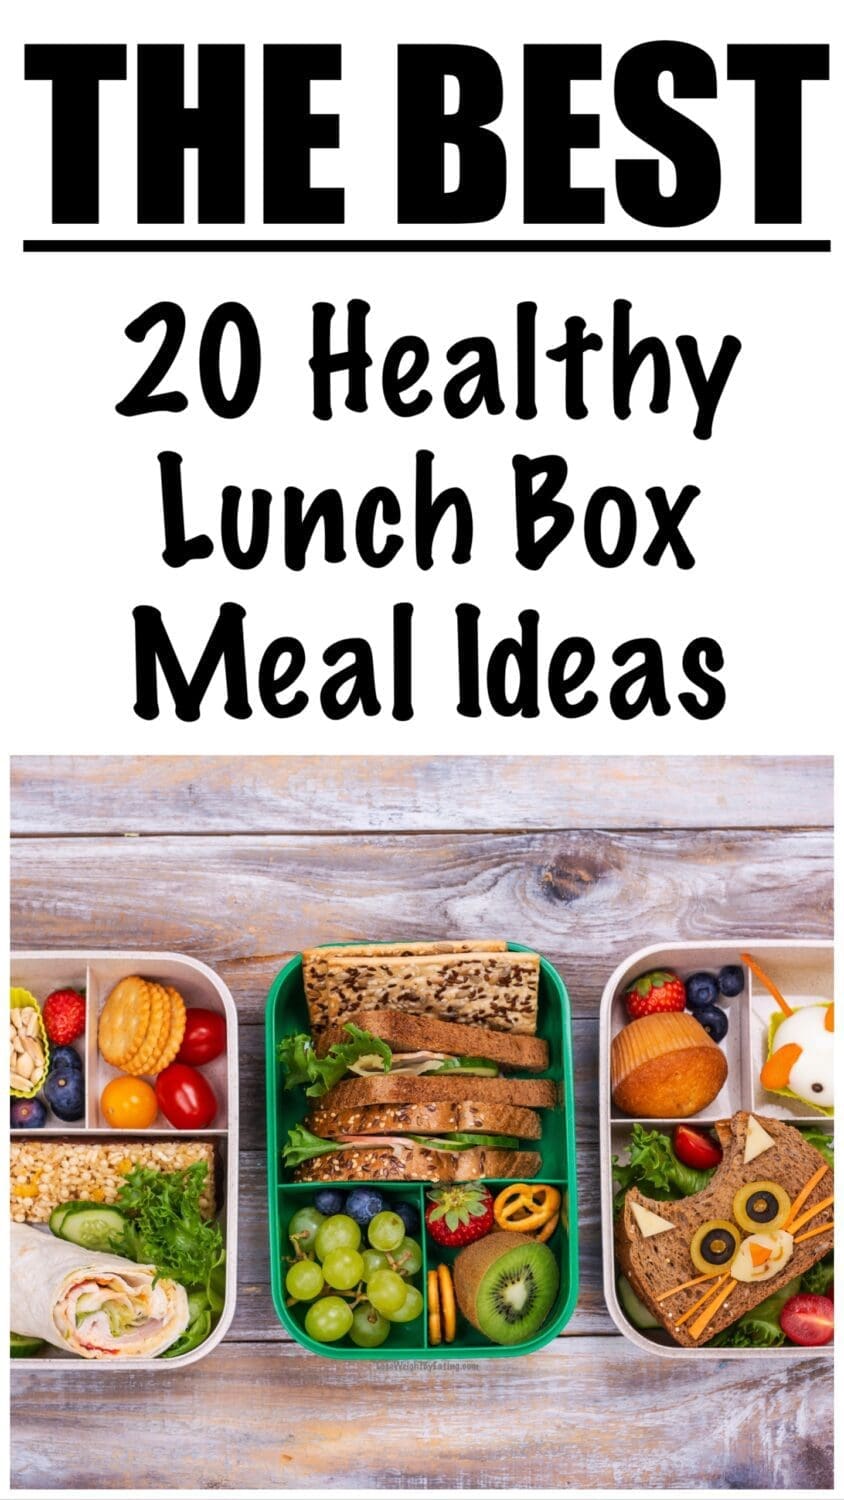 20 Healthy Lunch Box Meal Ideas